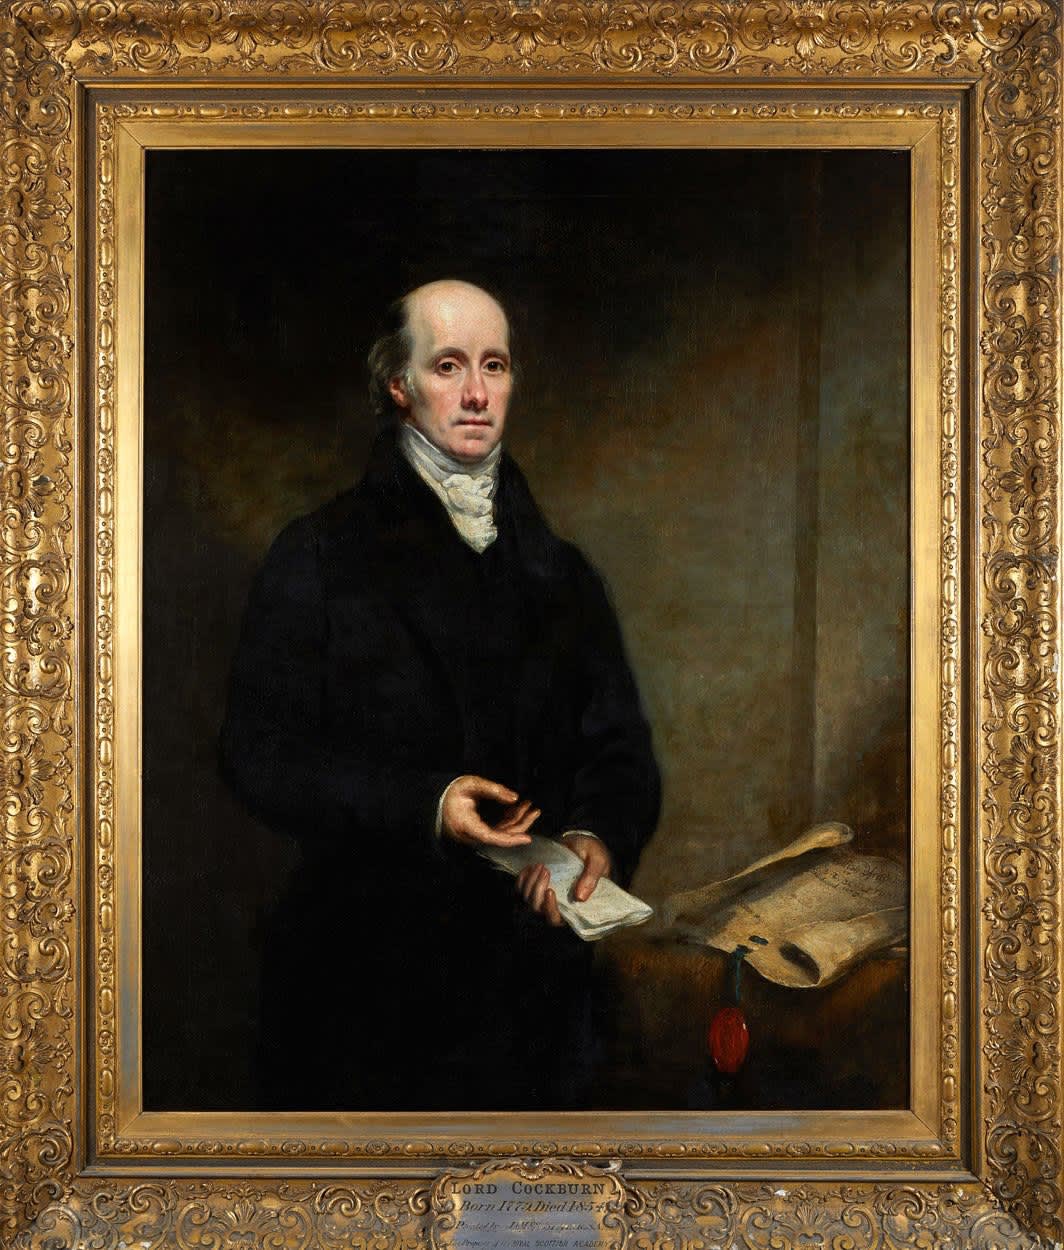 John Syme RSA (1795-1861) Portrait of The Solicitor General, Lord Cockburn  oil on canvas, 1831, 127 x 11.4cm  RSA Diploma Collection (Deposited 1831) 2008.055